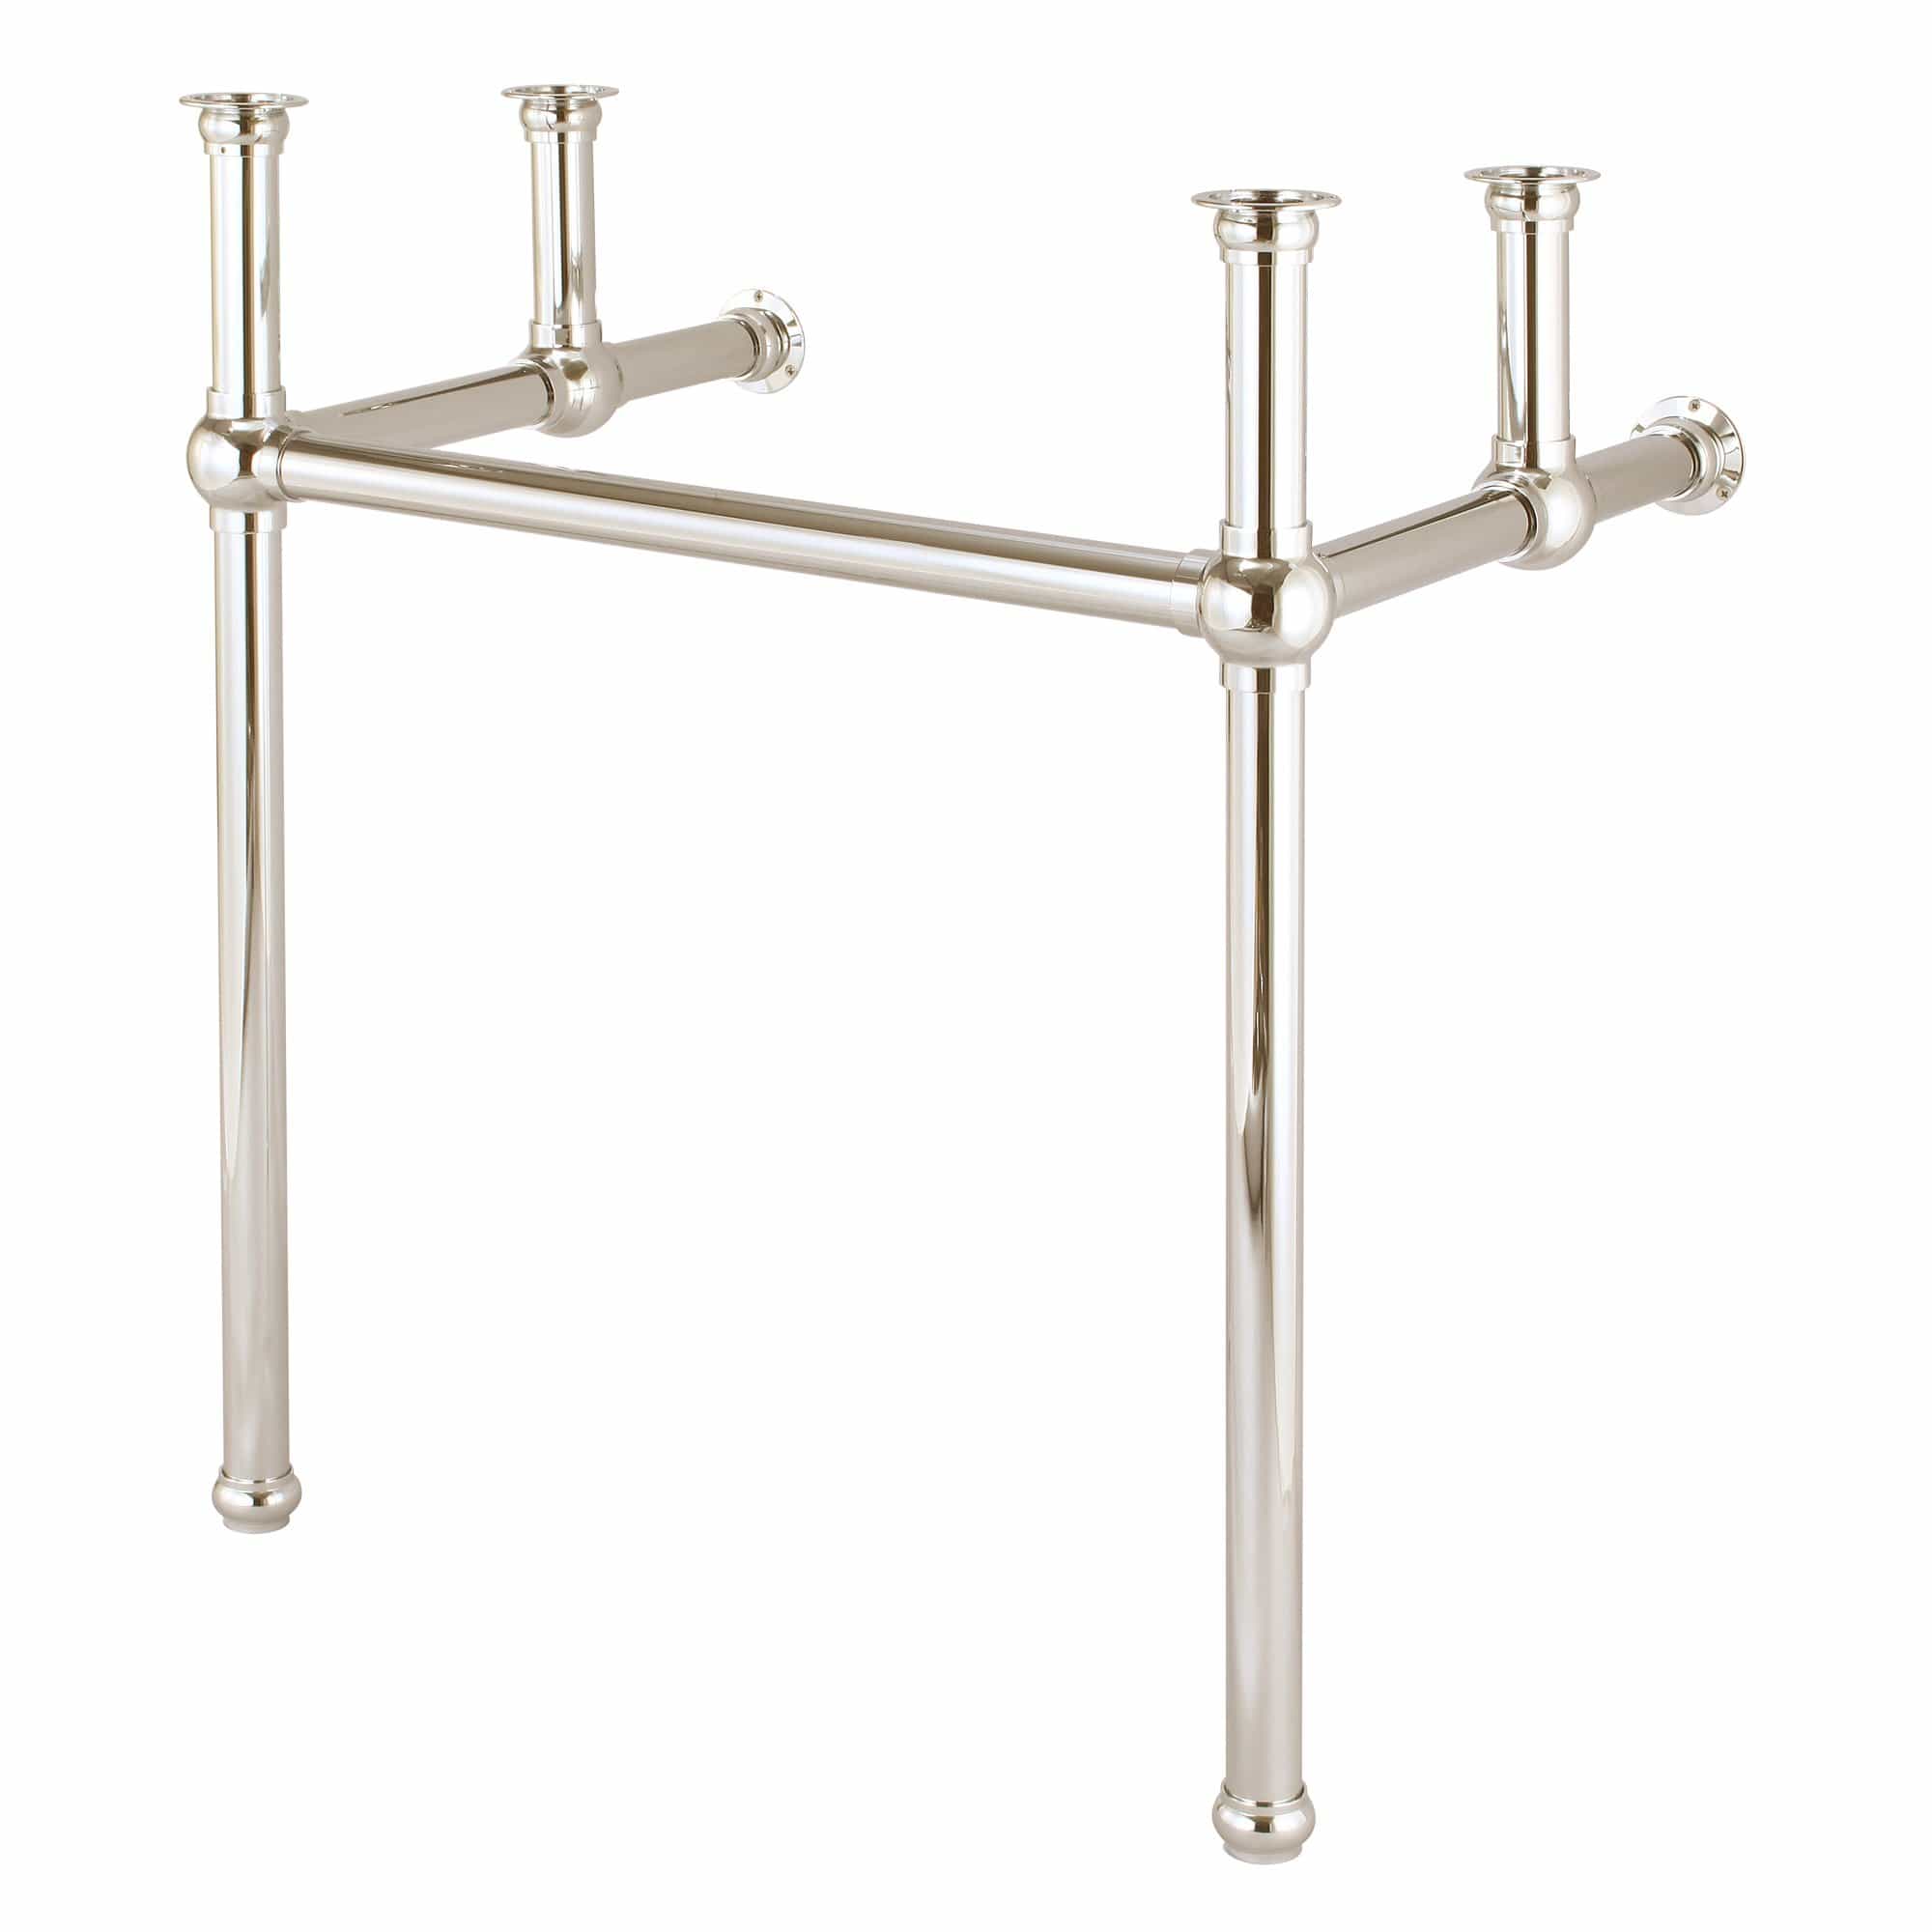 Water Creation Embassy 30 Inch Wide Single Wash Stand Only in Polished Nickel (PVD) Finish - Molaix732030757615Wash StandEB30A-0500